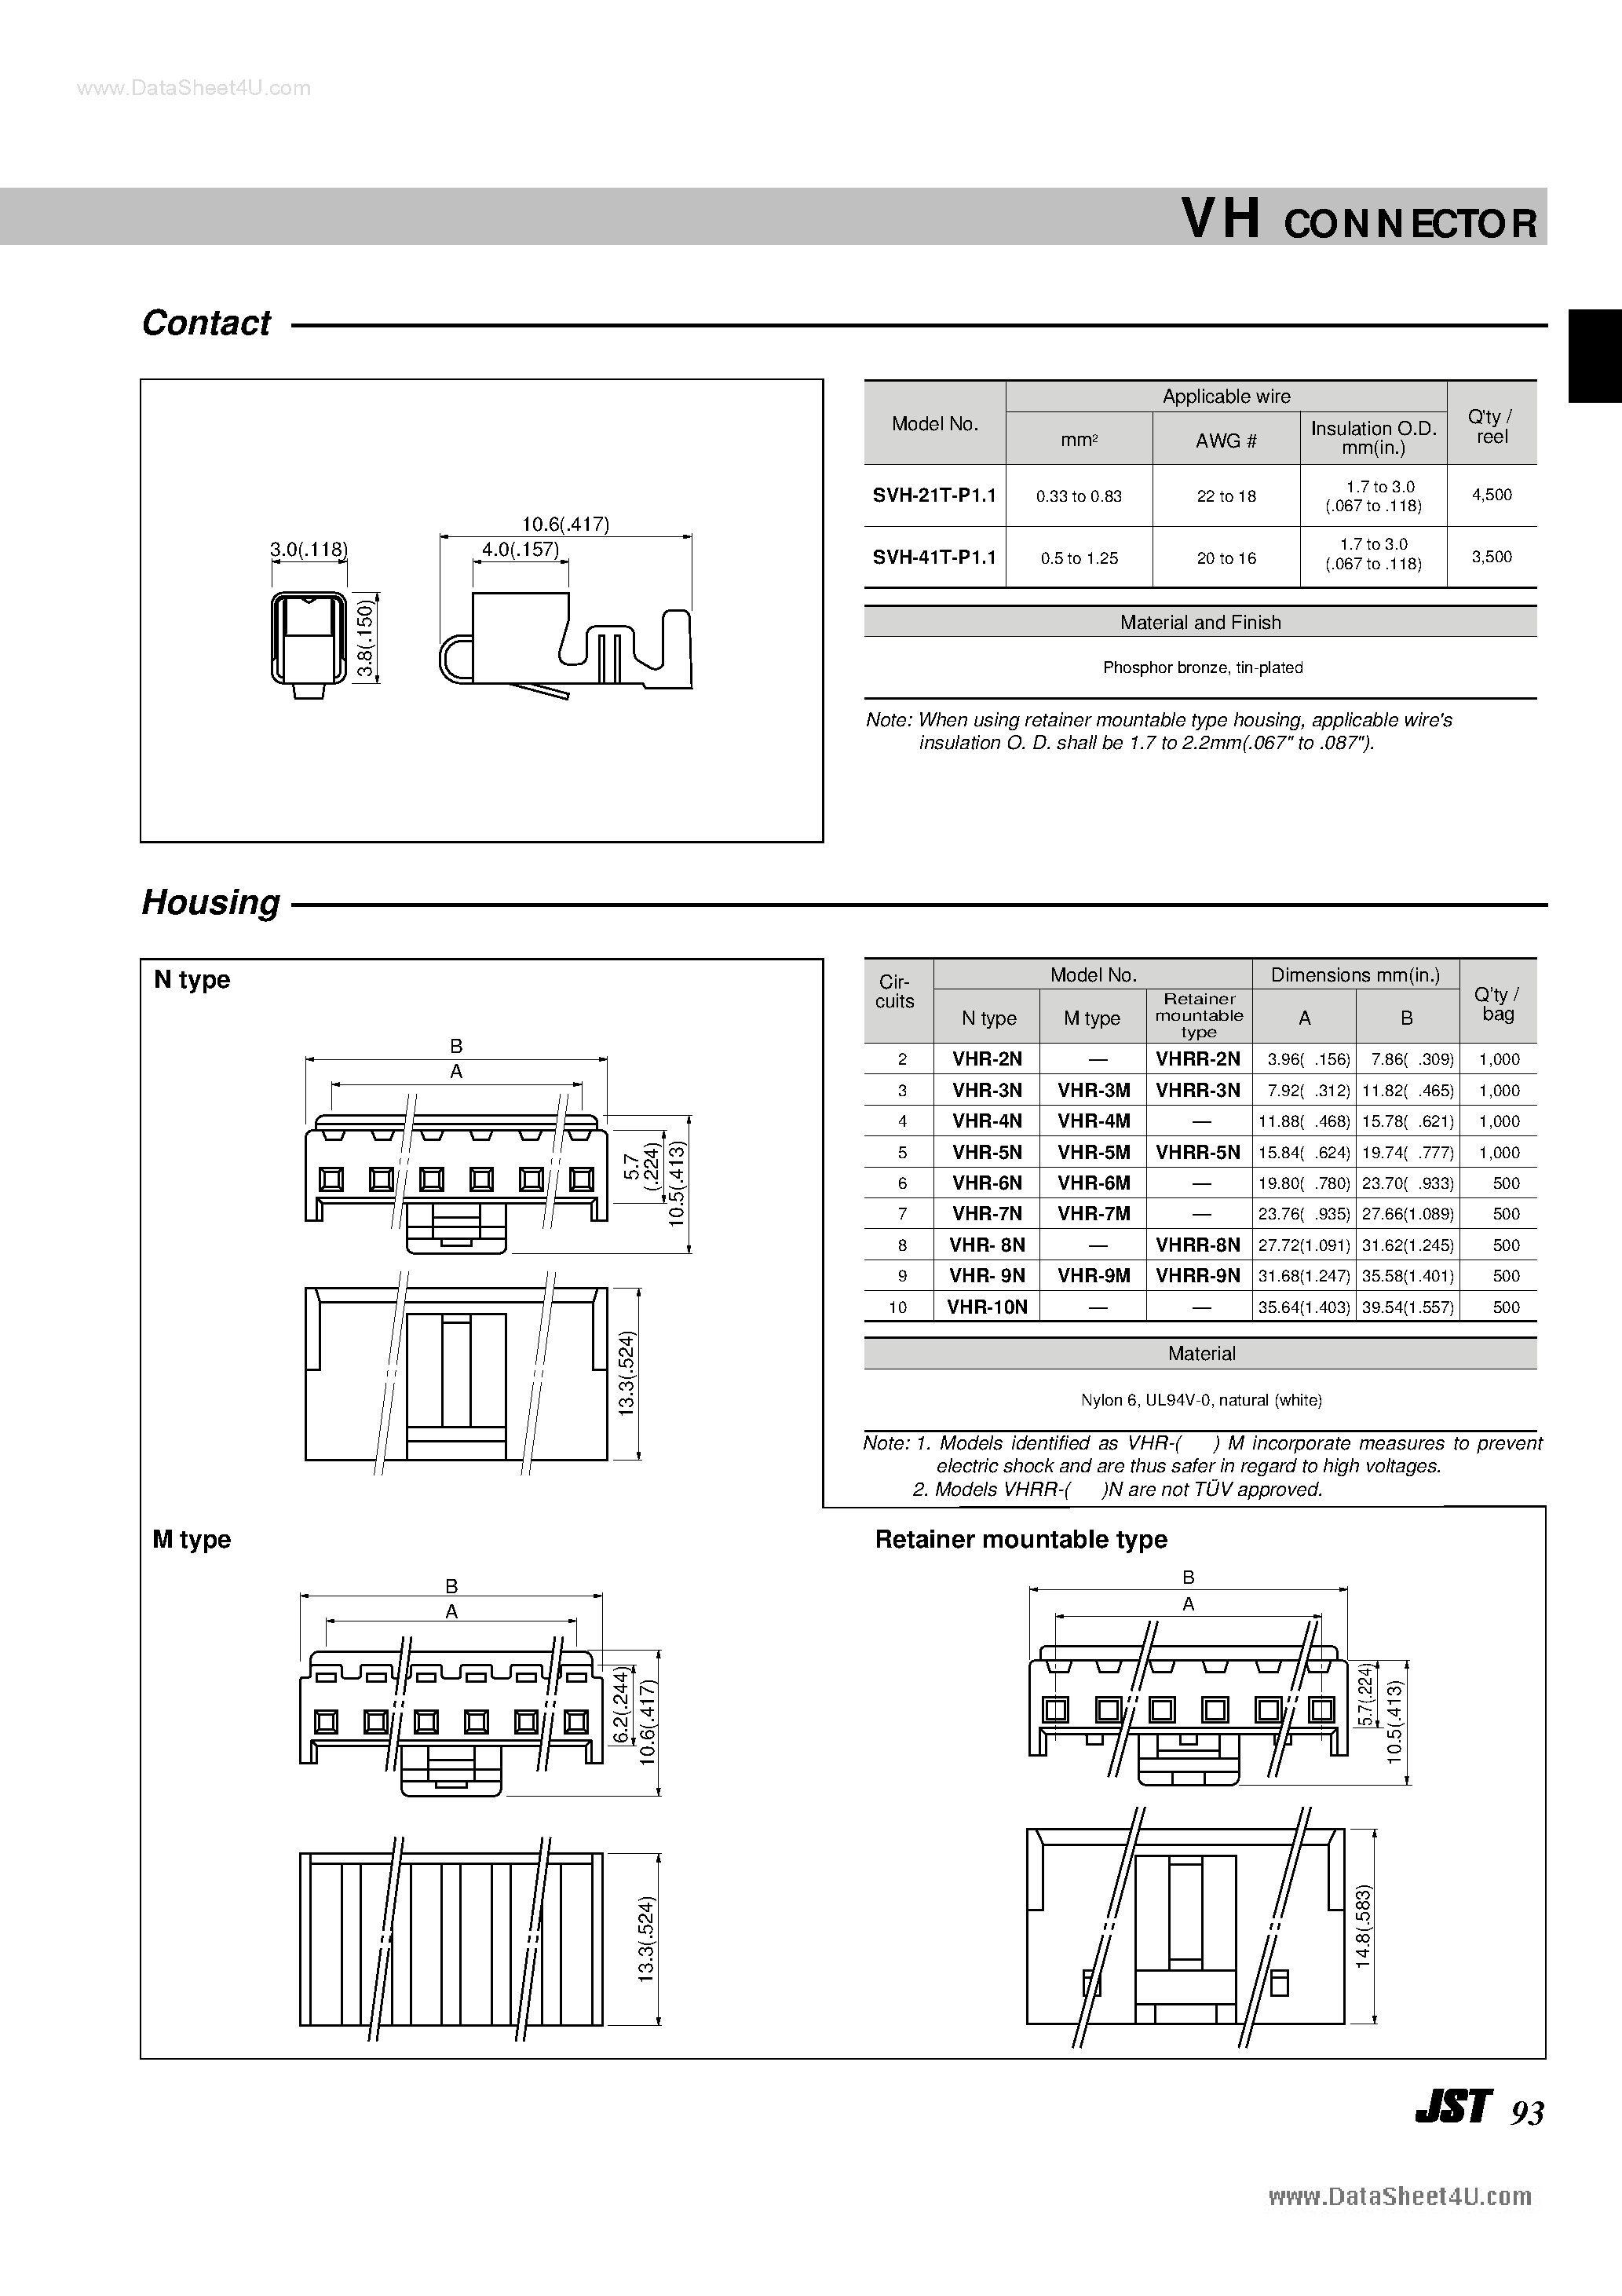 Datasheet B4P-VH - VH Connector page 2